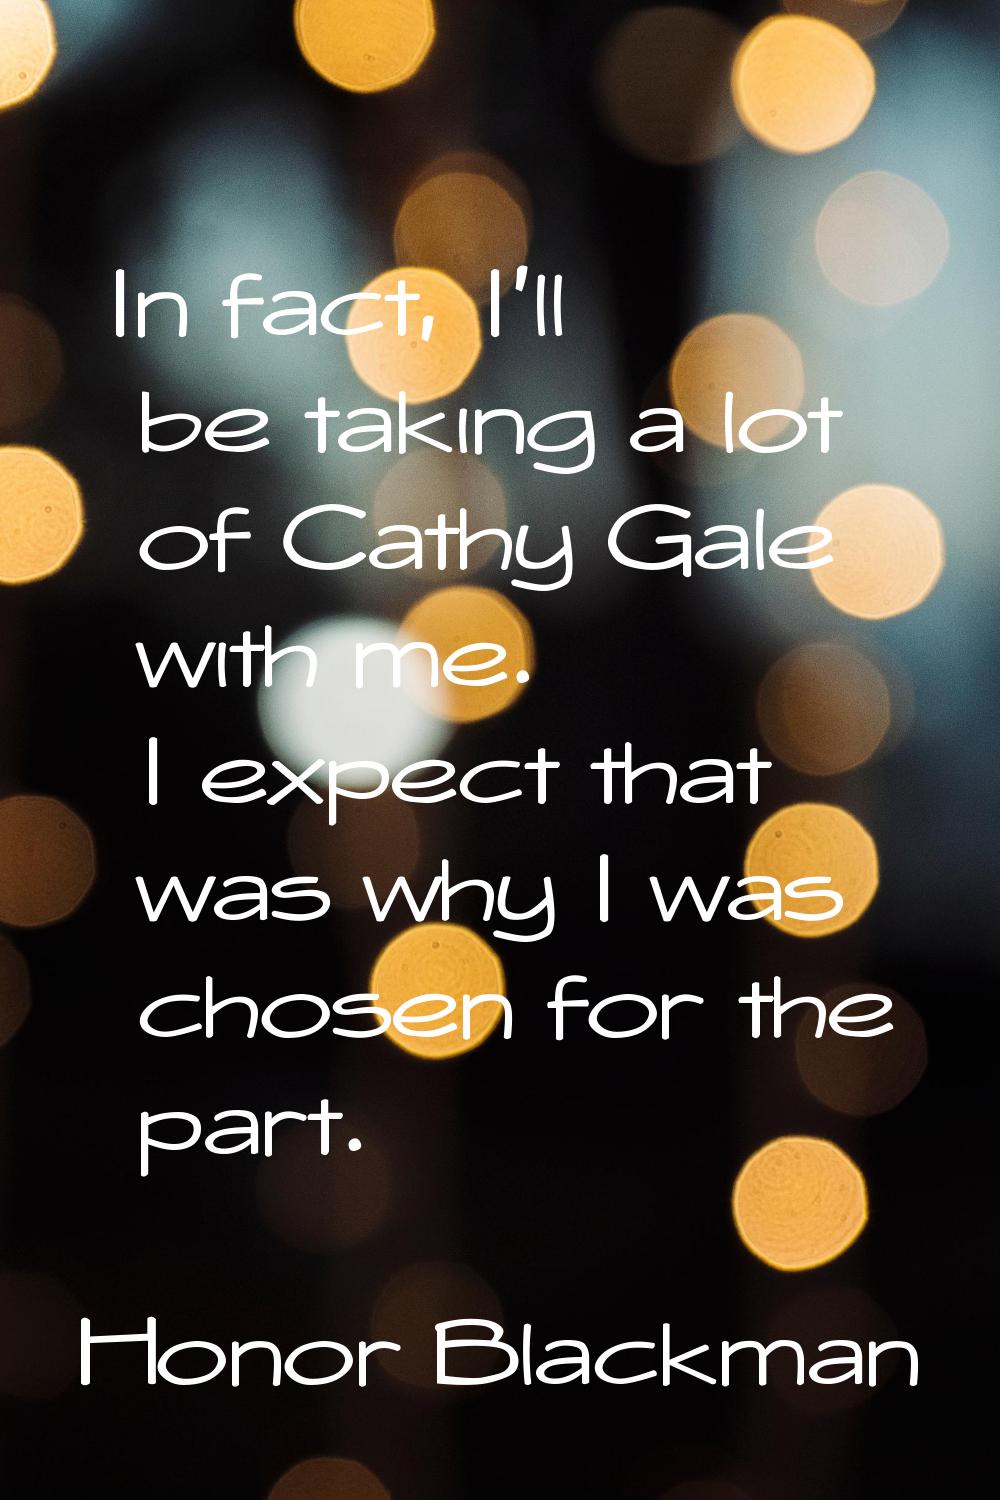 In fact, I'll be taking a lot of Cathy Gale with me. I expect that was why I was chosen for the par